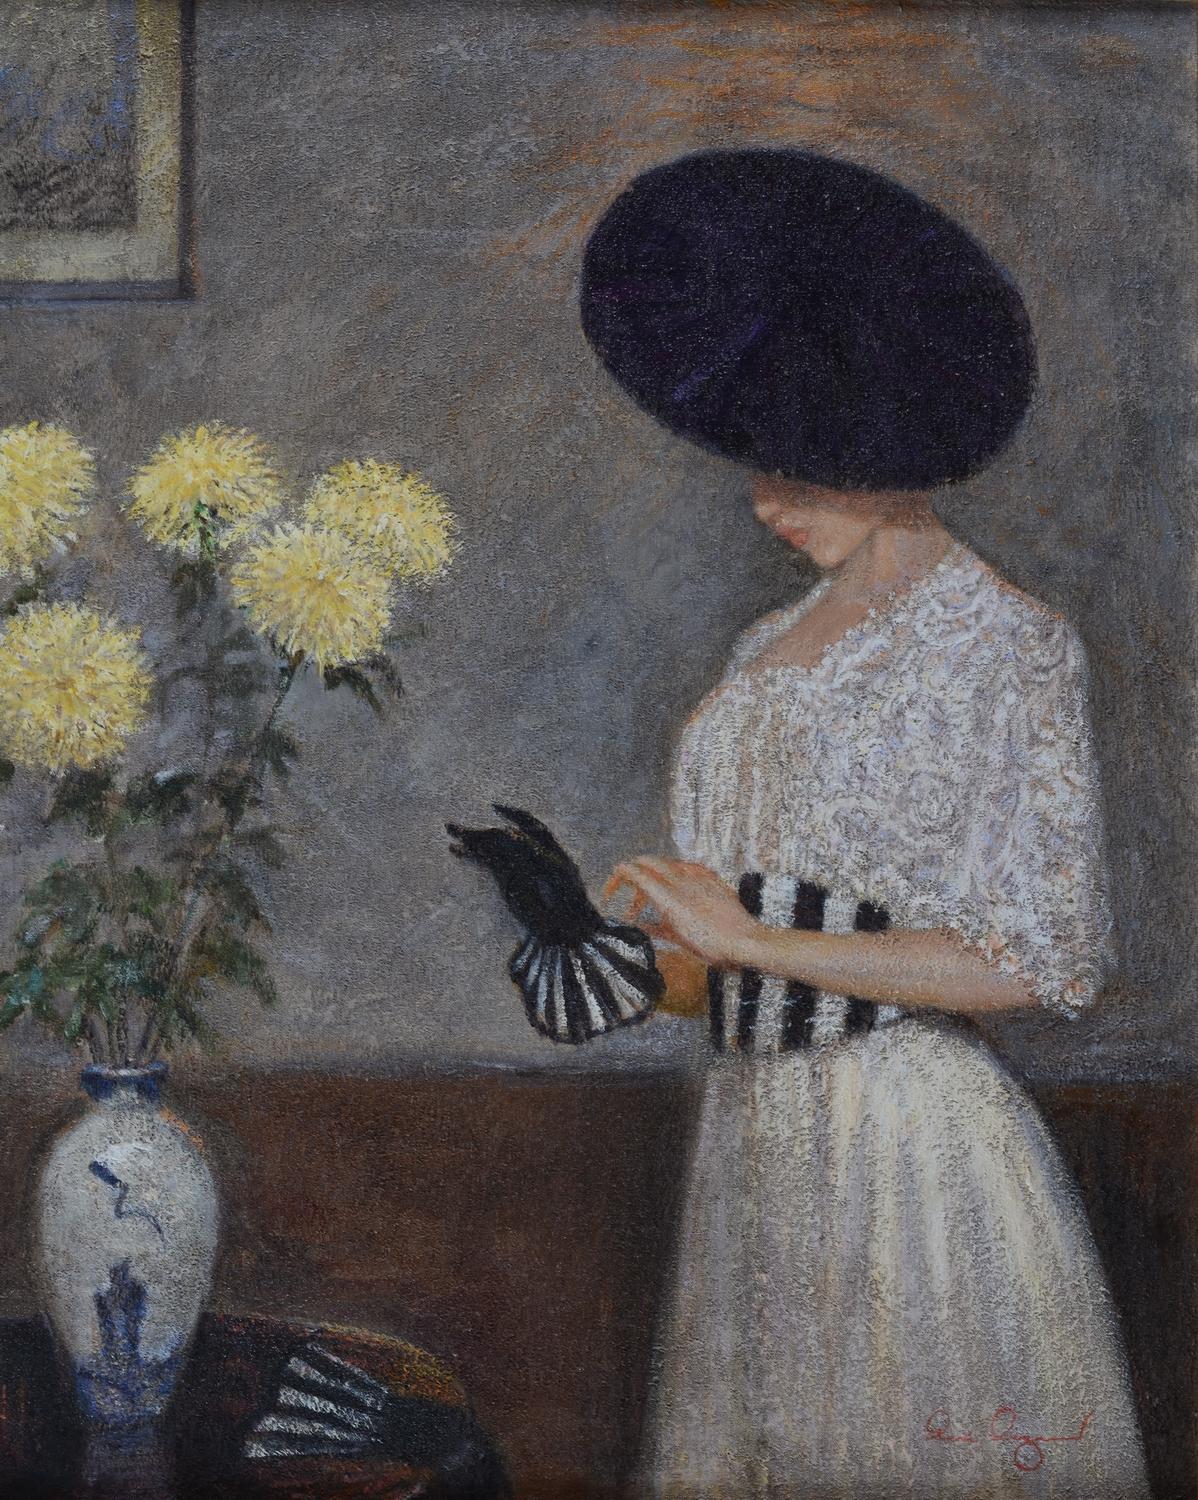 The Black Hat on beautiful model in white dress and gloves near bunch of flowers